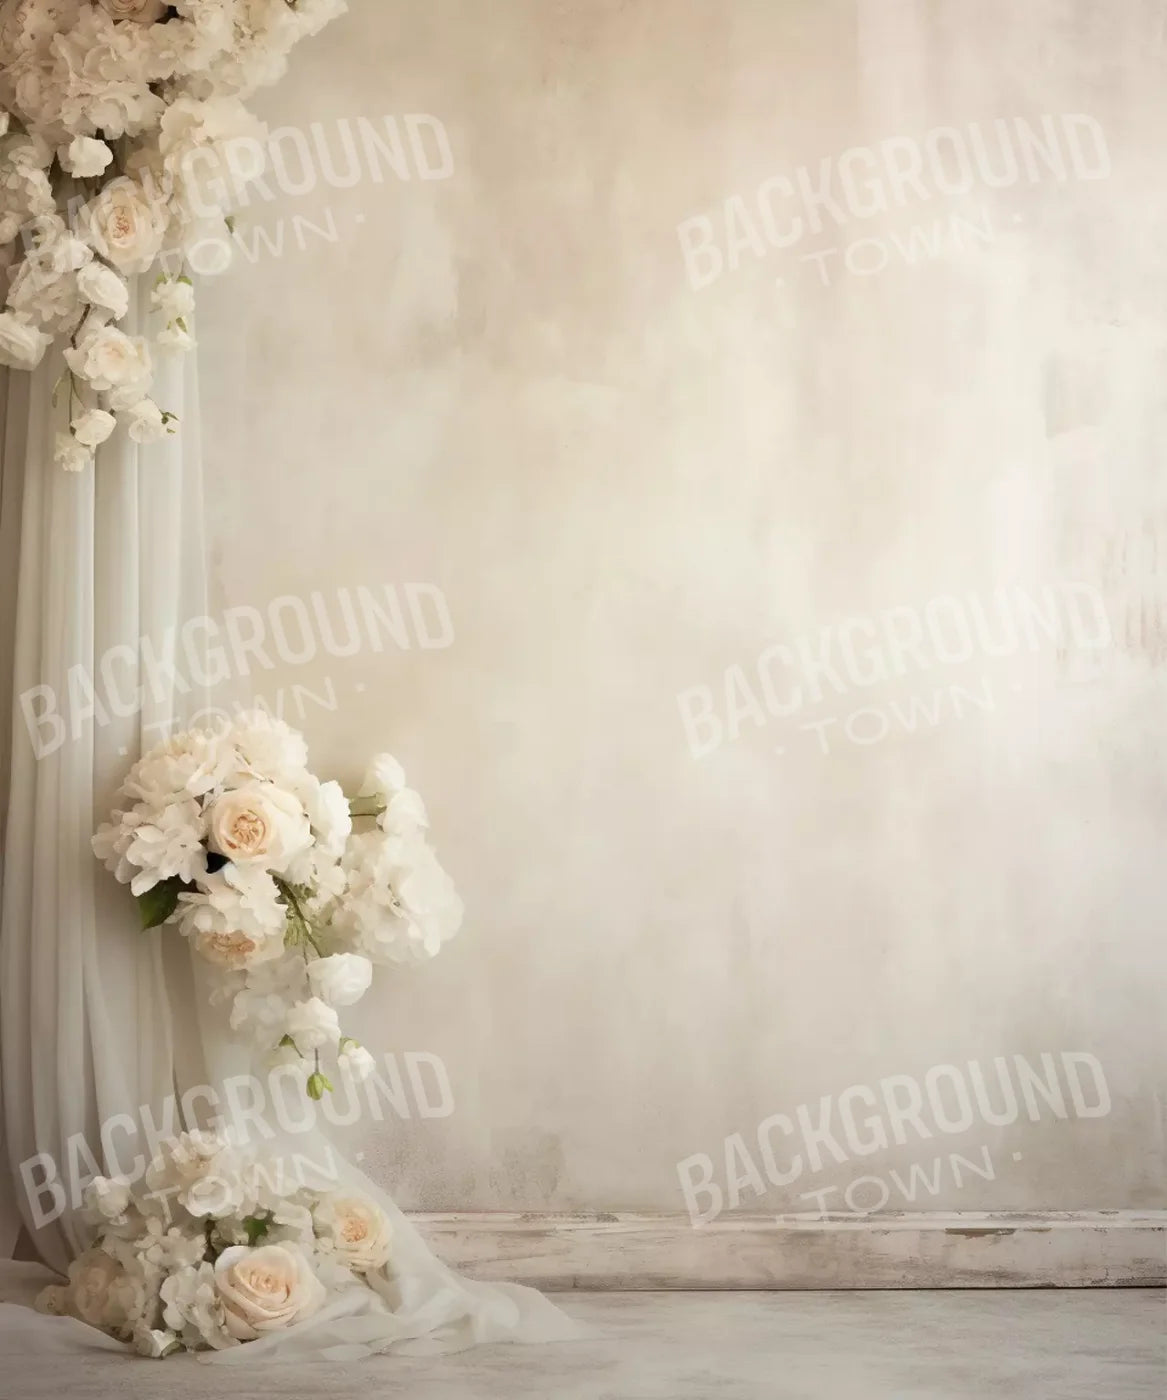 Plaster Wall With Florals 10’X12’ Ultracloth (120 X 144 Inch) Backdrop